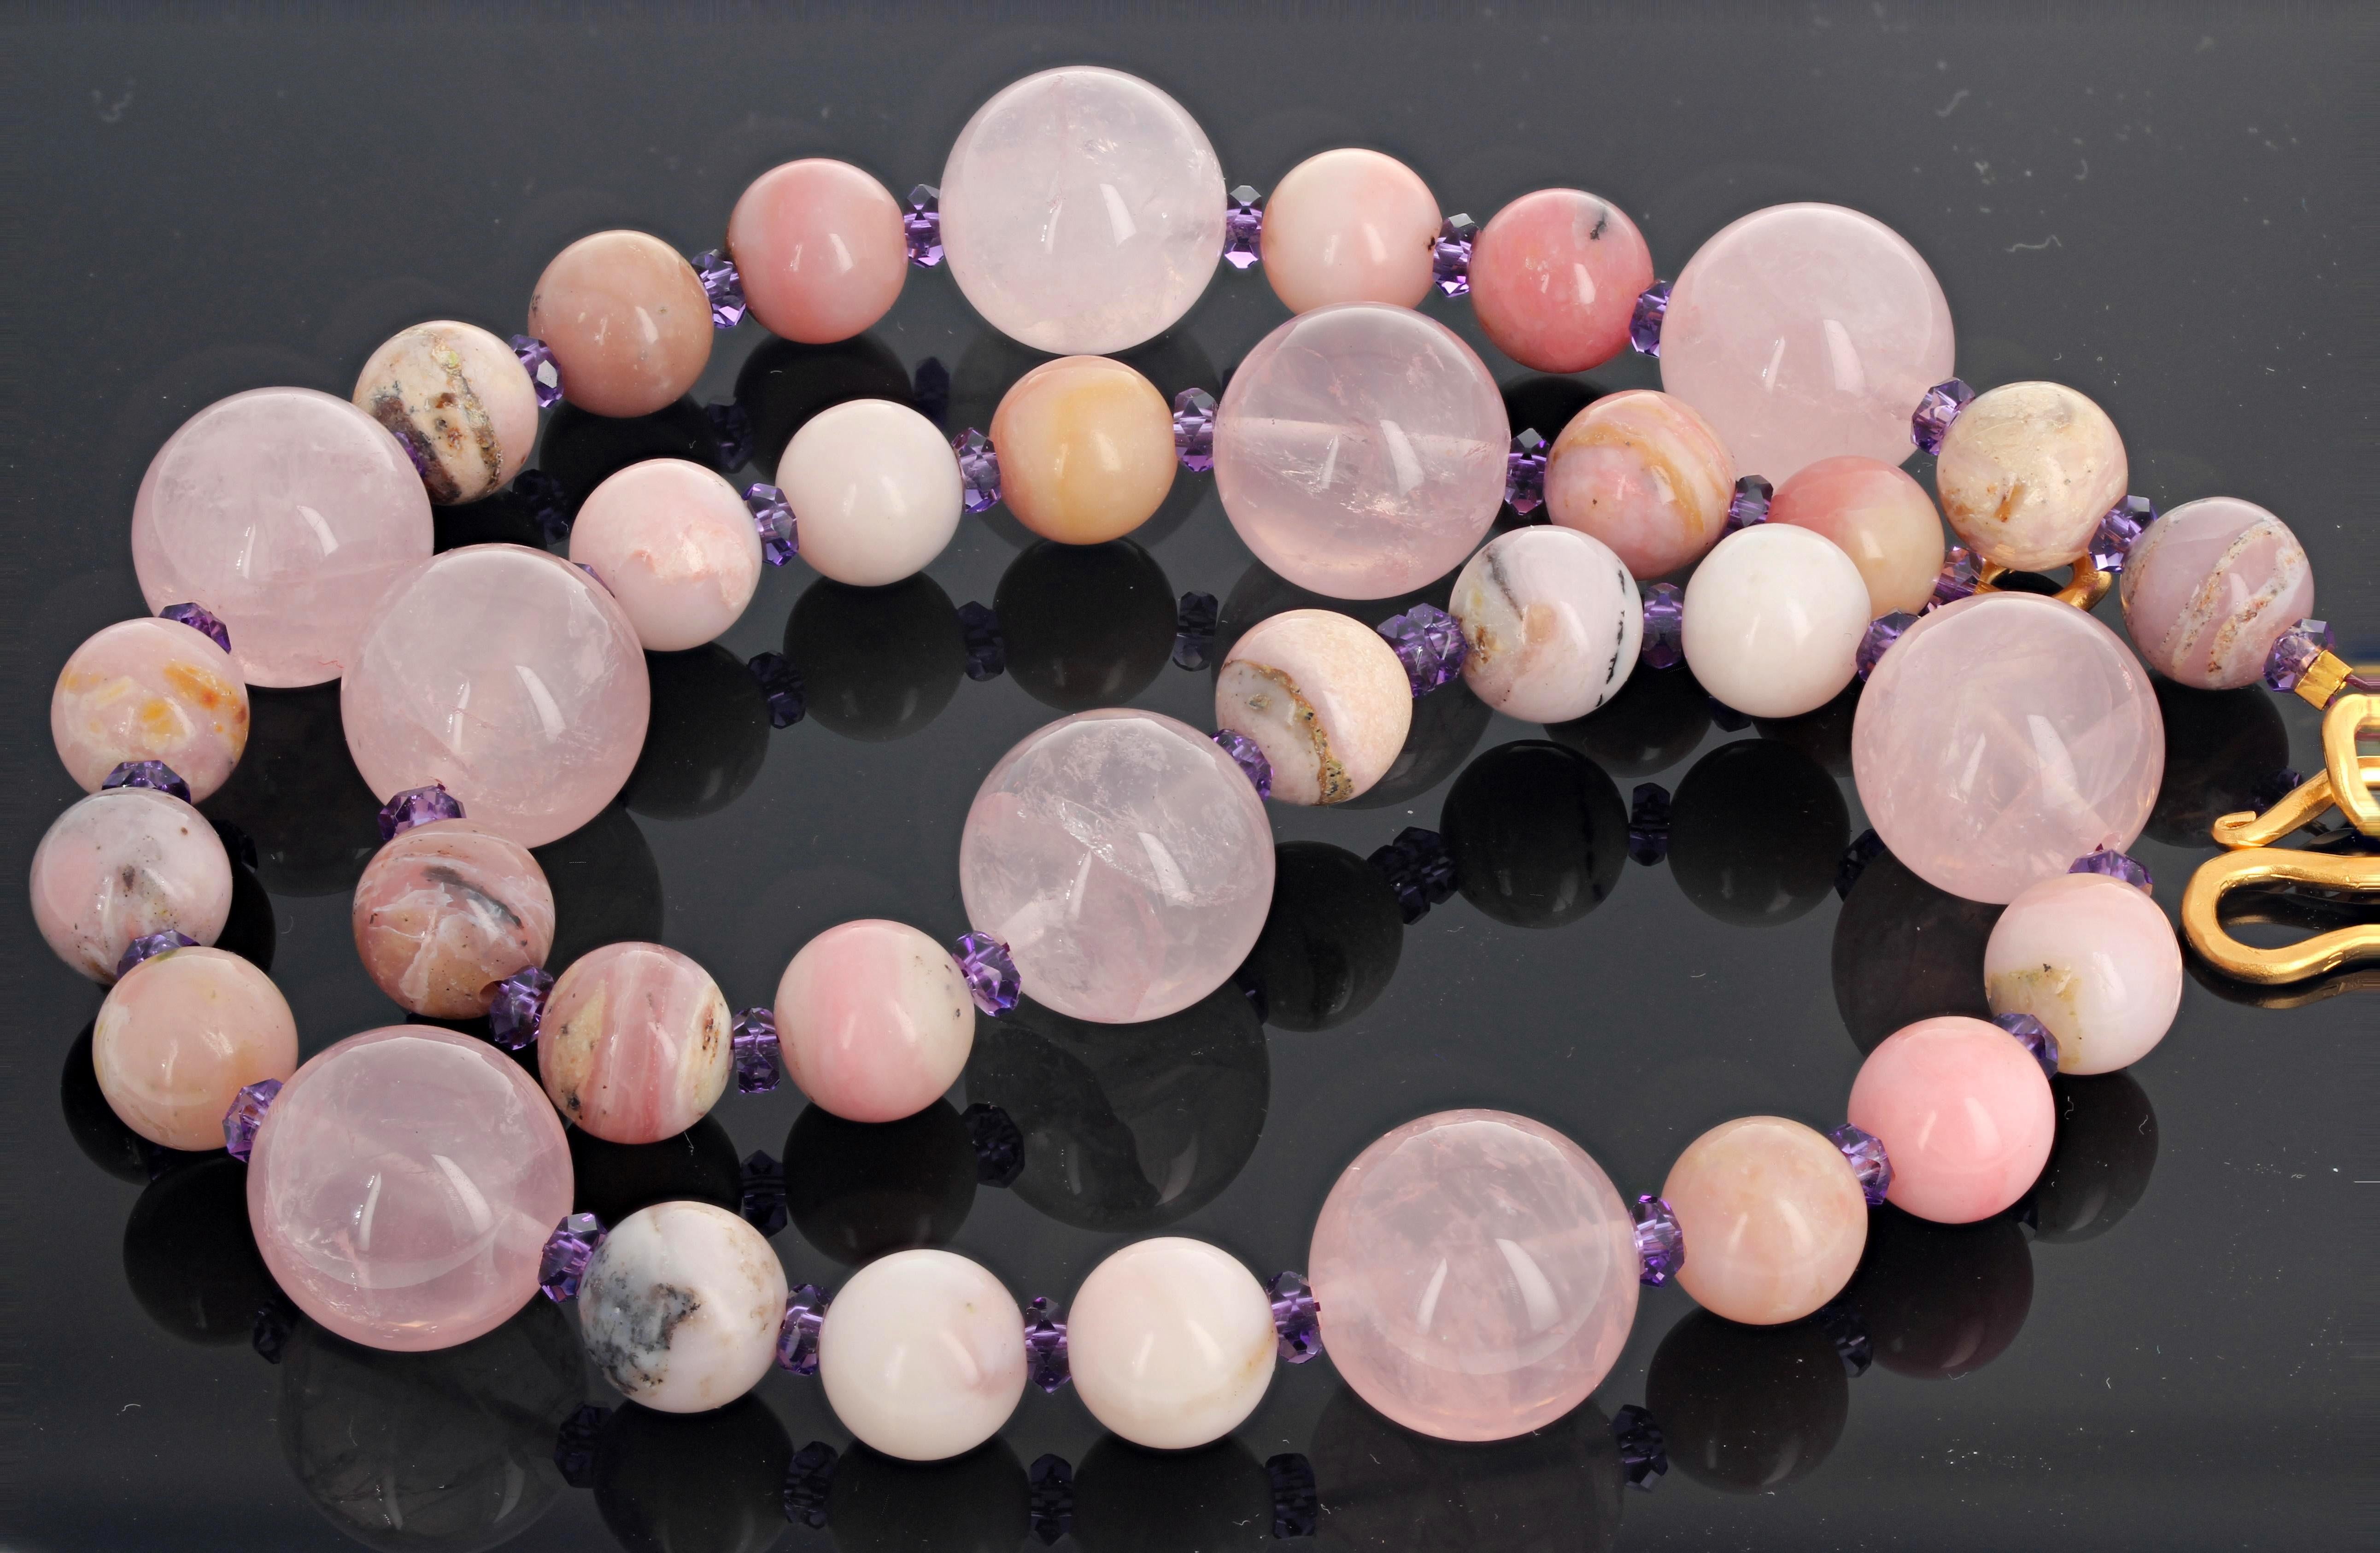 Splendid pink pink pink rose Quartz glows translucently enhanced with rare natural pink Peruvian Opals accented with sparkling Amethysts set with a hammered gold plated clasp.  This is 20.25 inches long.  